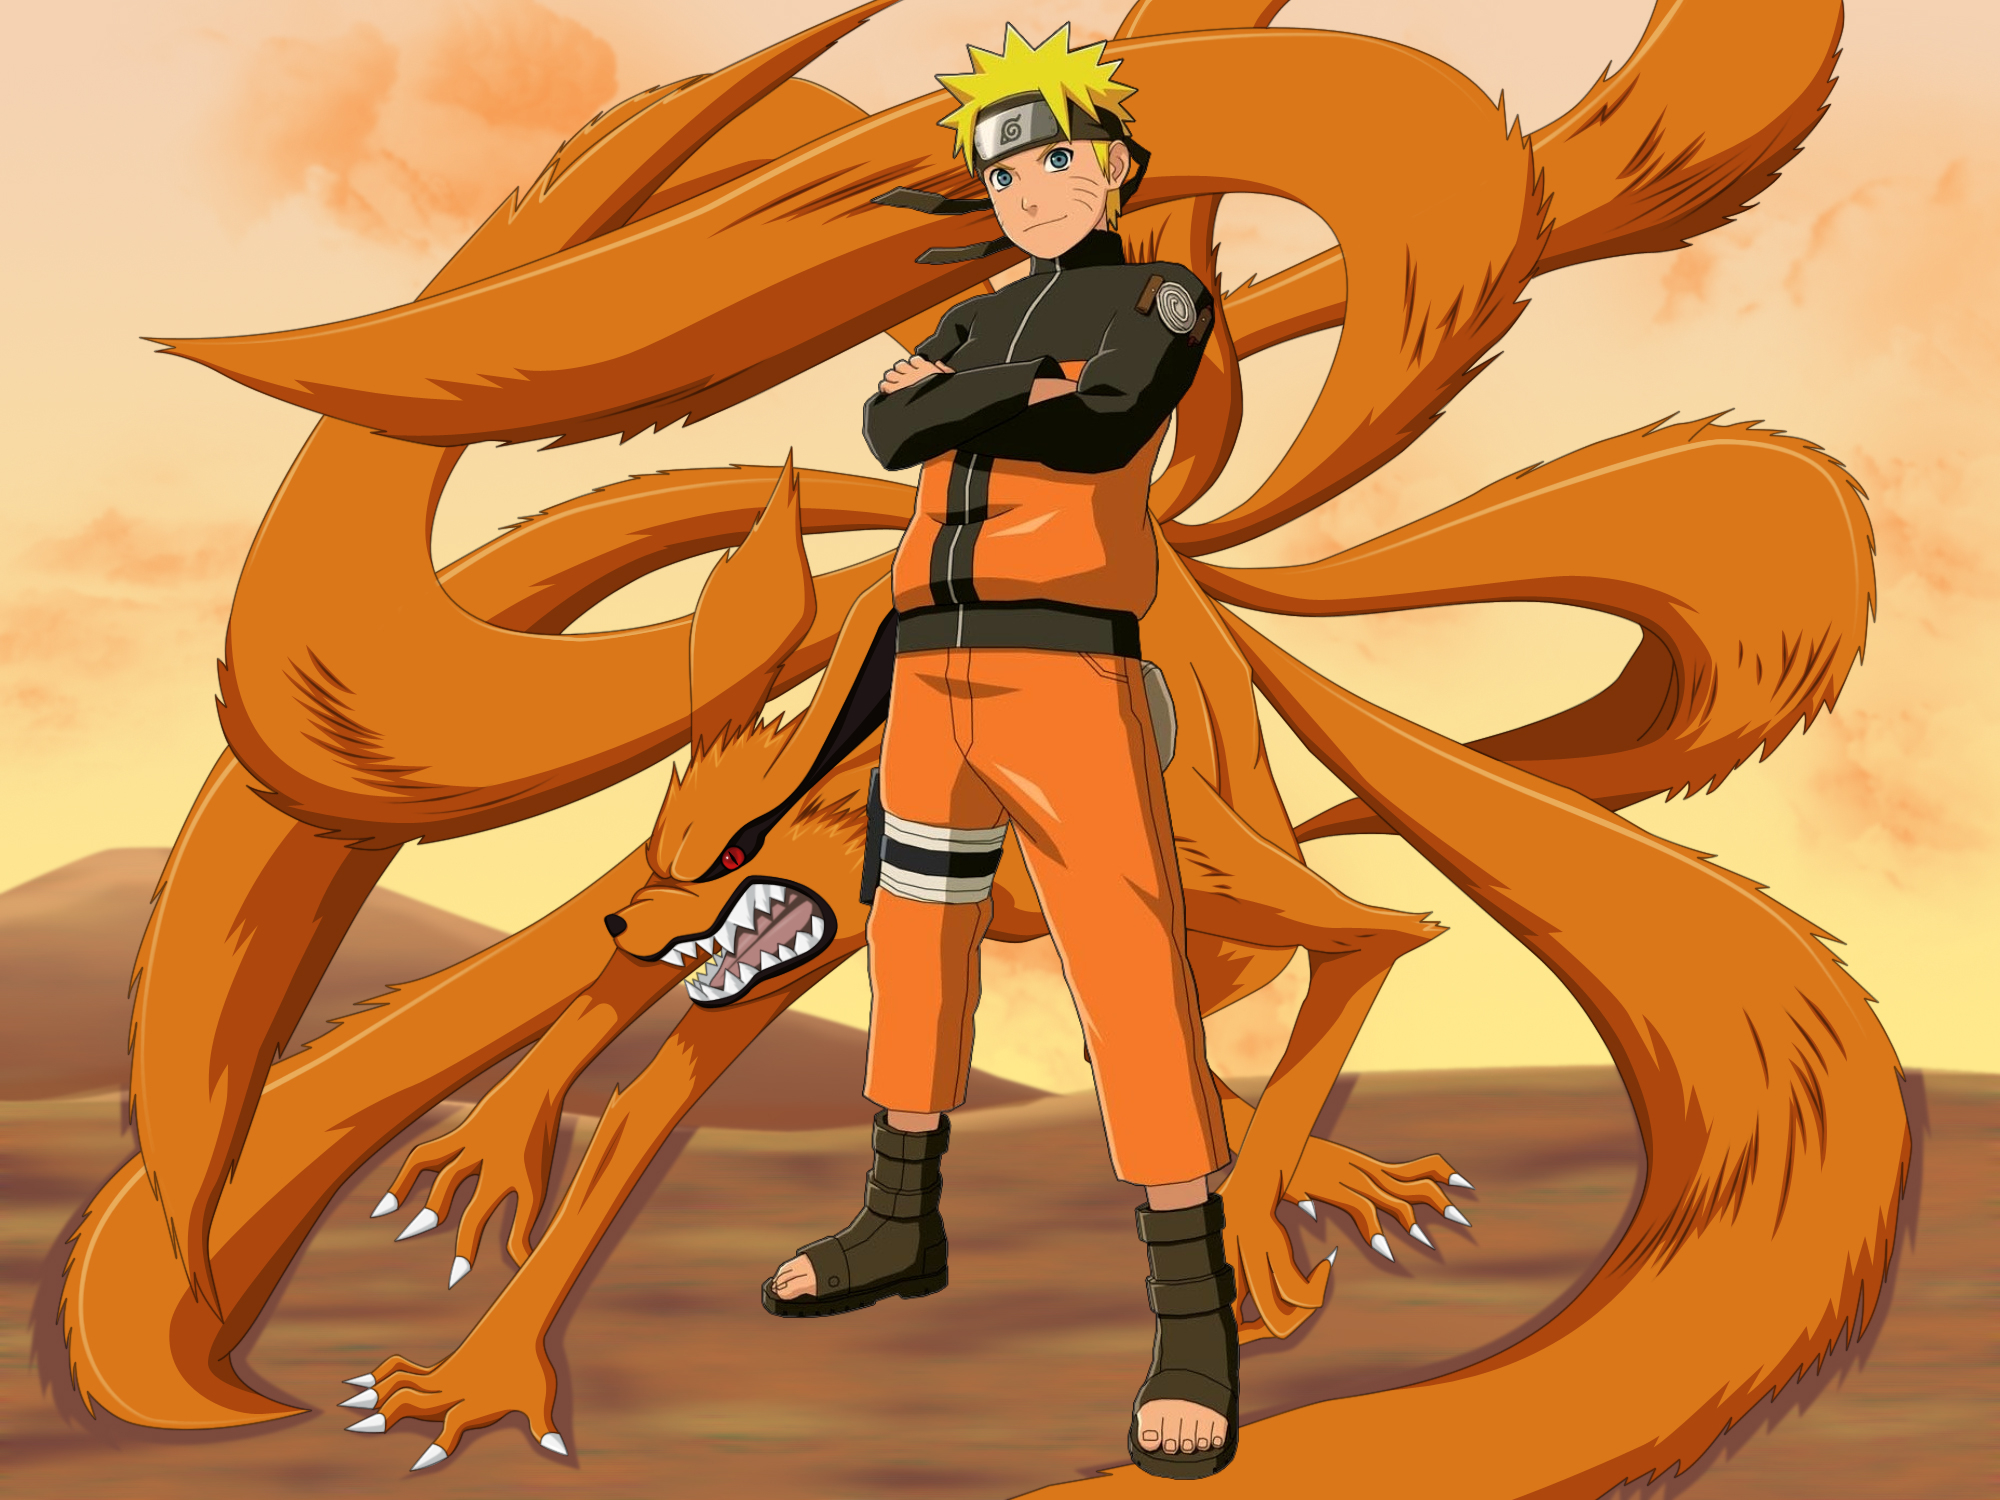 Naruto: 5 Storylines That Are Actually Better Than One Piece Marineford Arc  - FandomWire